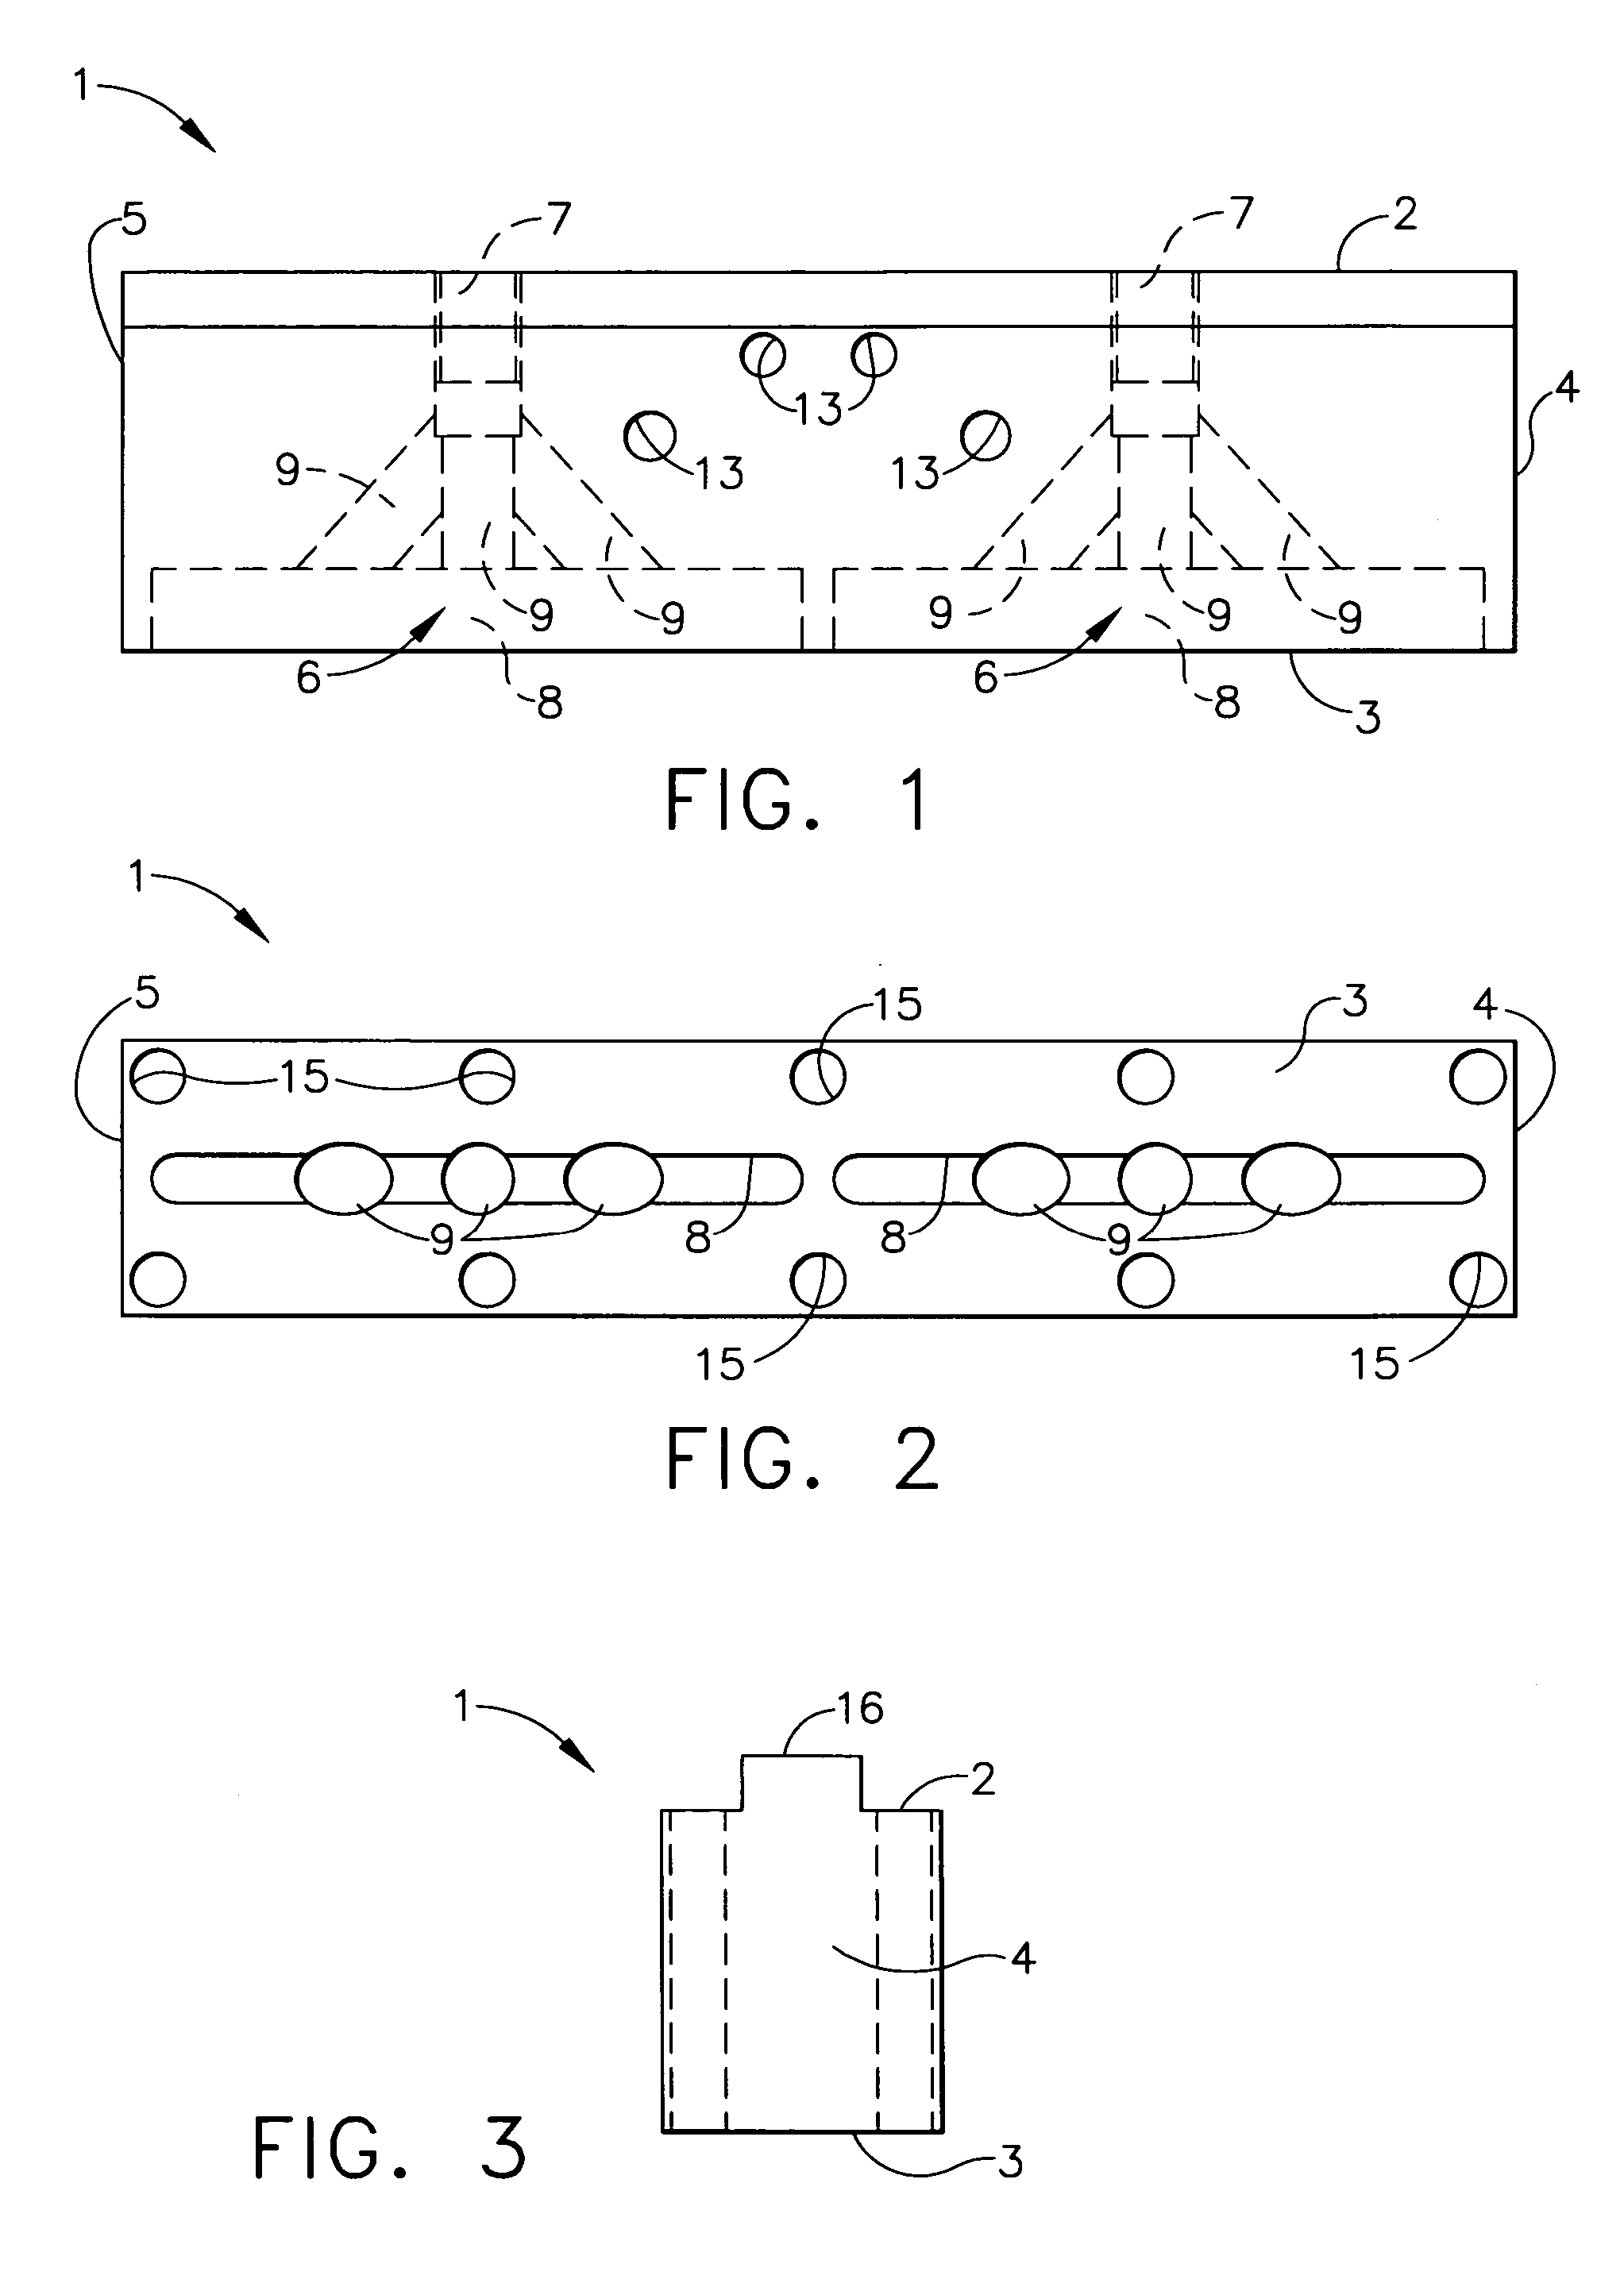 Sound damping compositions and methods for applying and baking same onto substrates